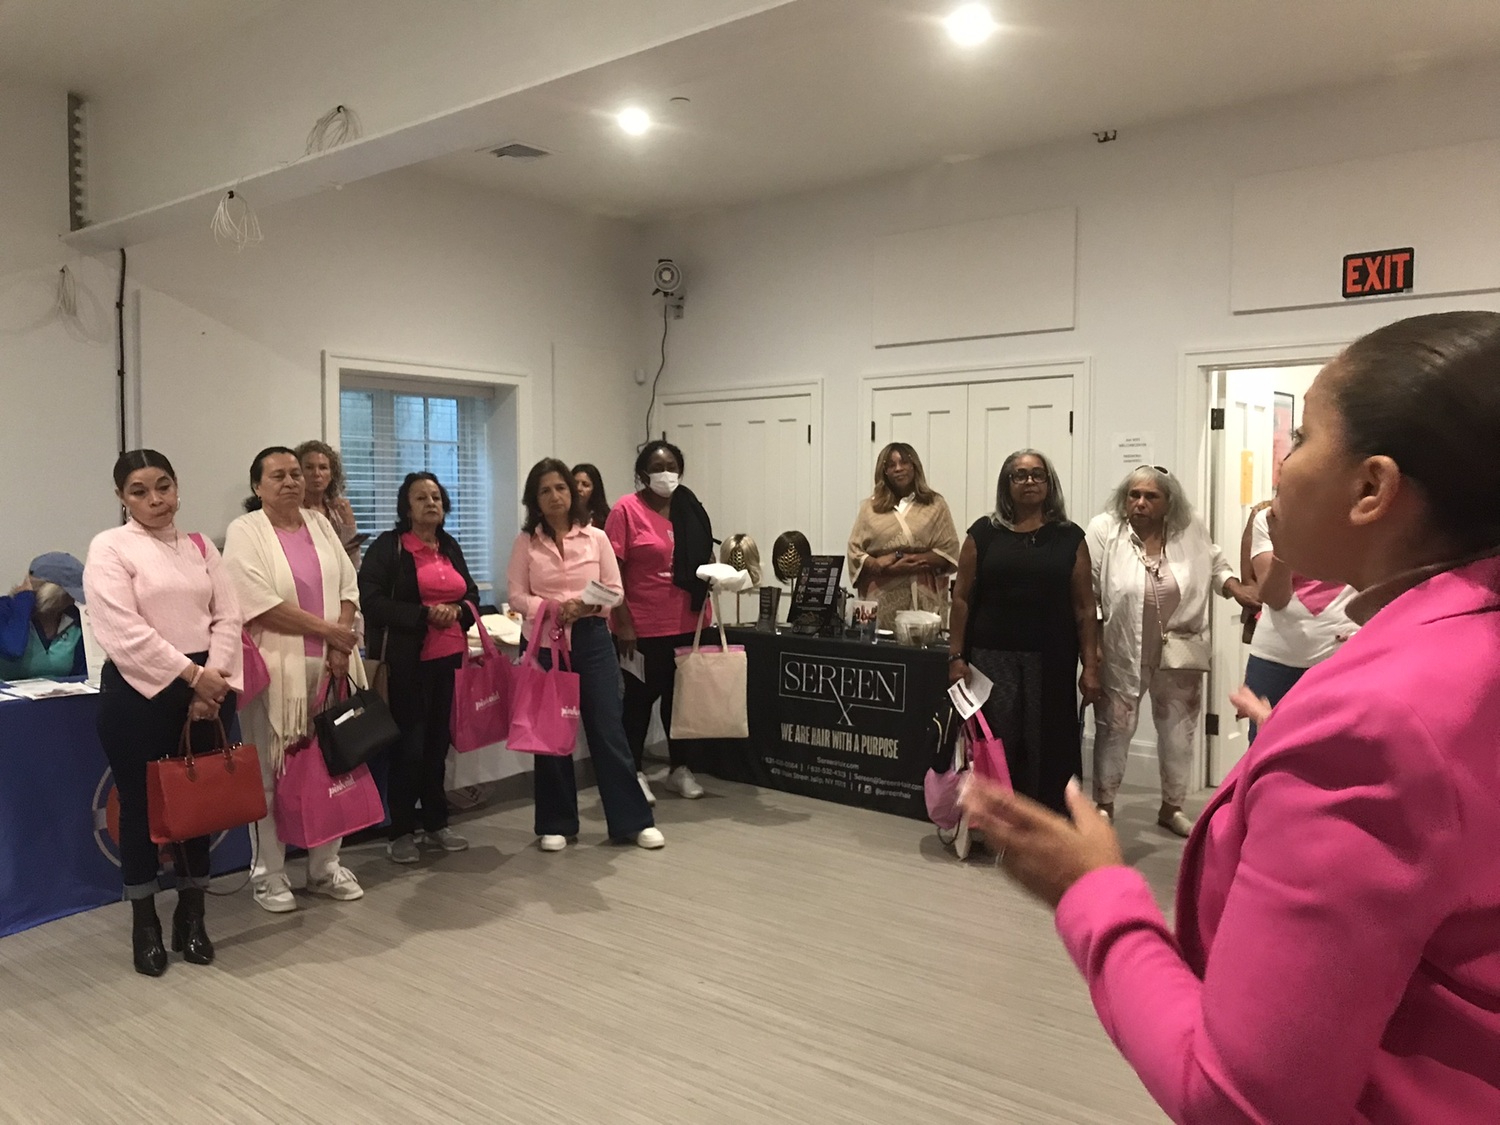 The second annual Breast Cancer Awareness Expo at the Bridgehampton Child Care and Recreational Center, sponsored by the Ellen Hermanson Foundation, was a success on Saturday, with several speakers and other wellness initiatives.